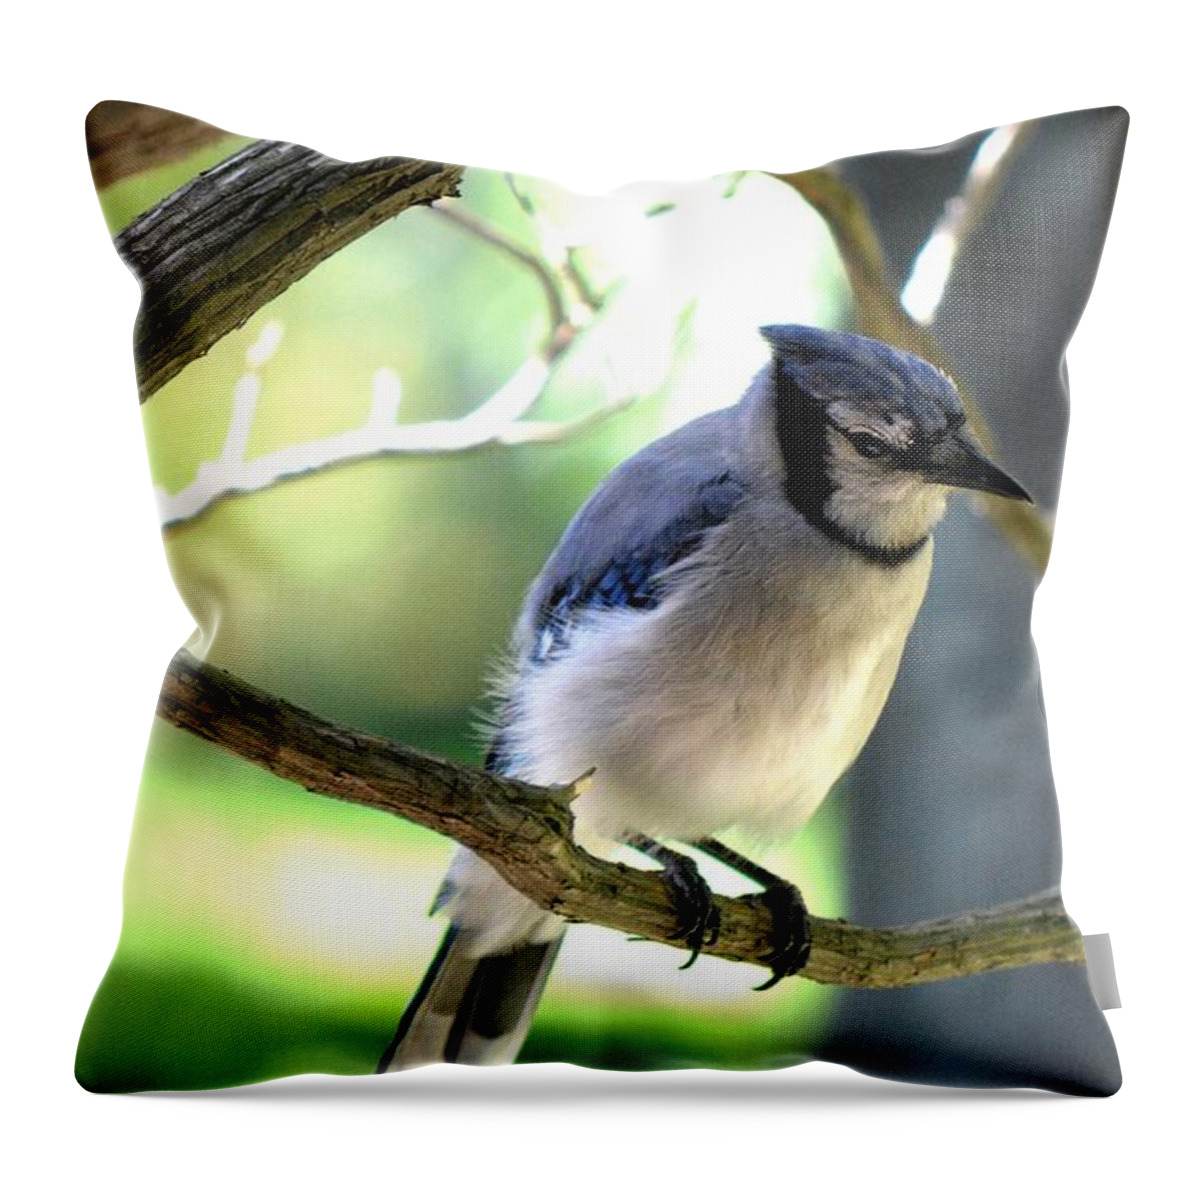 Bluejay Throw Pillow featuring the photograph Bluejay by Dani McEvoy